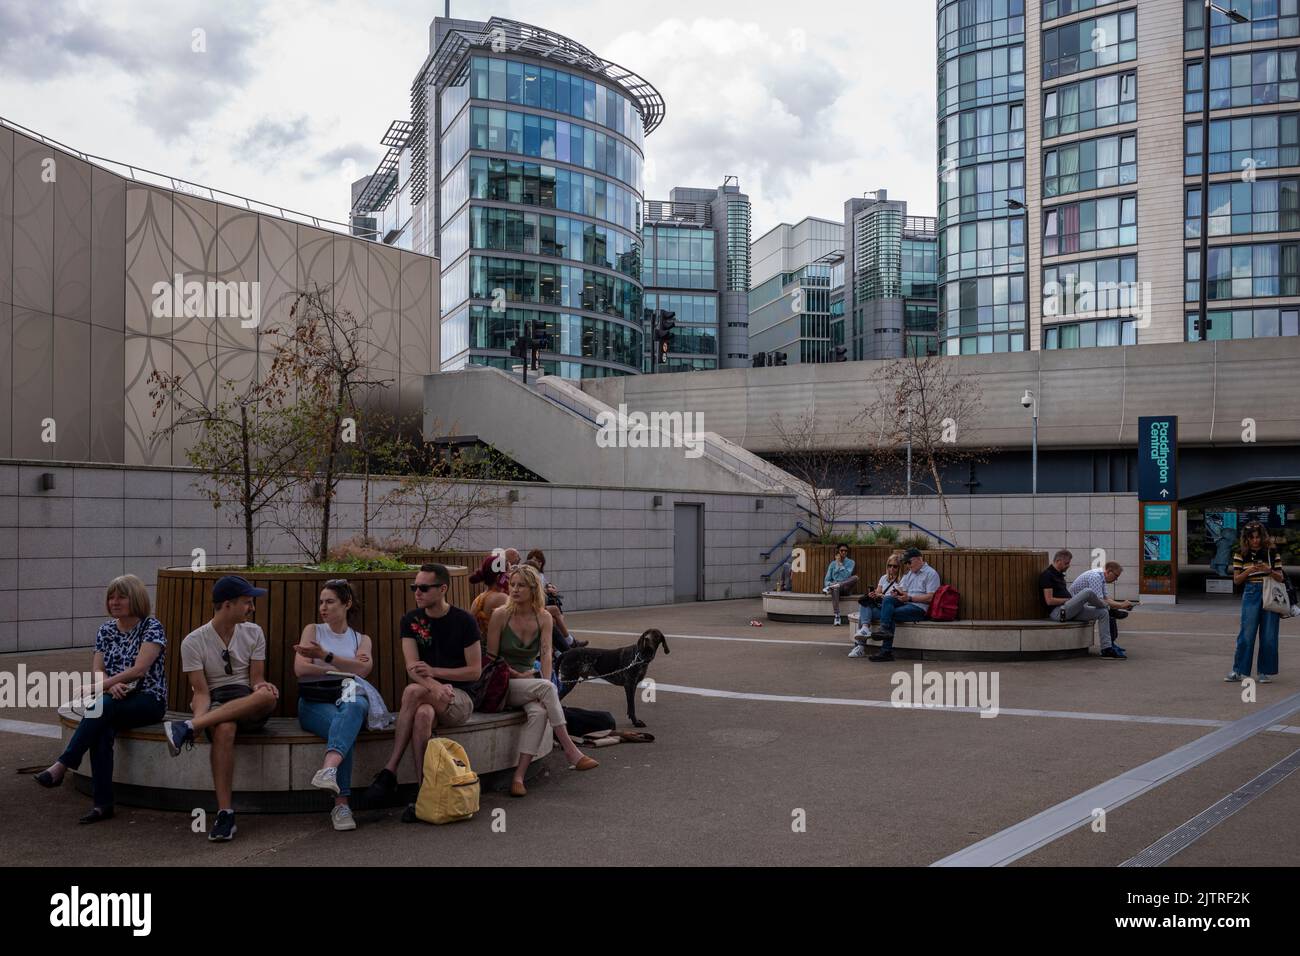 Paddington Basin, London. A regenerated area of Paddington, along the canal, with a walkway, cafes and restaurants along with modern apartments. Stock Photo